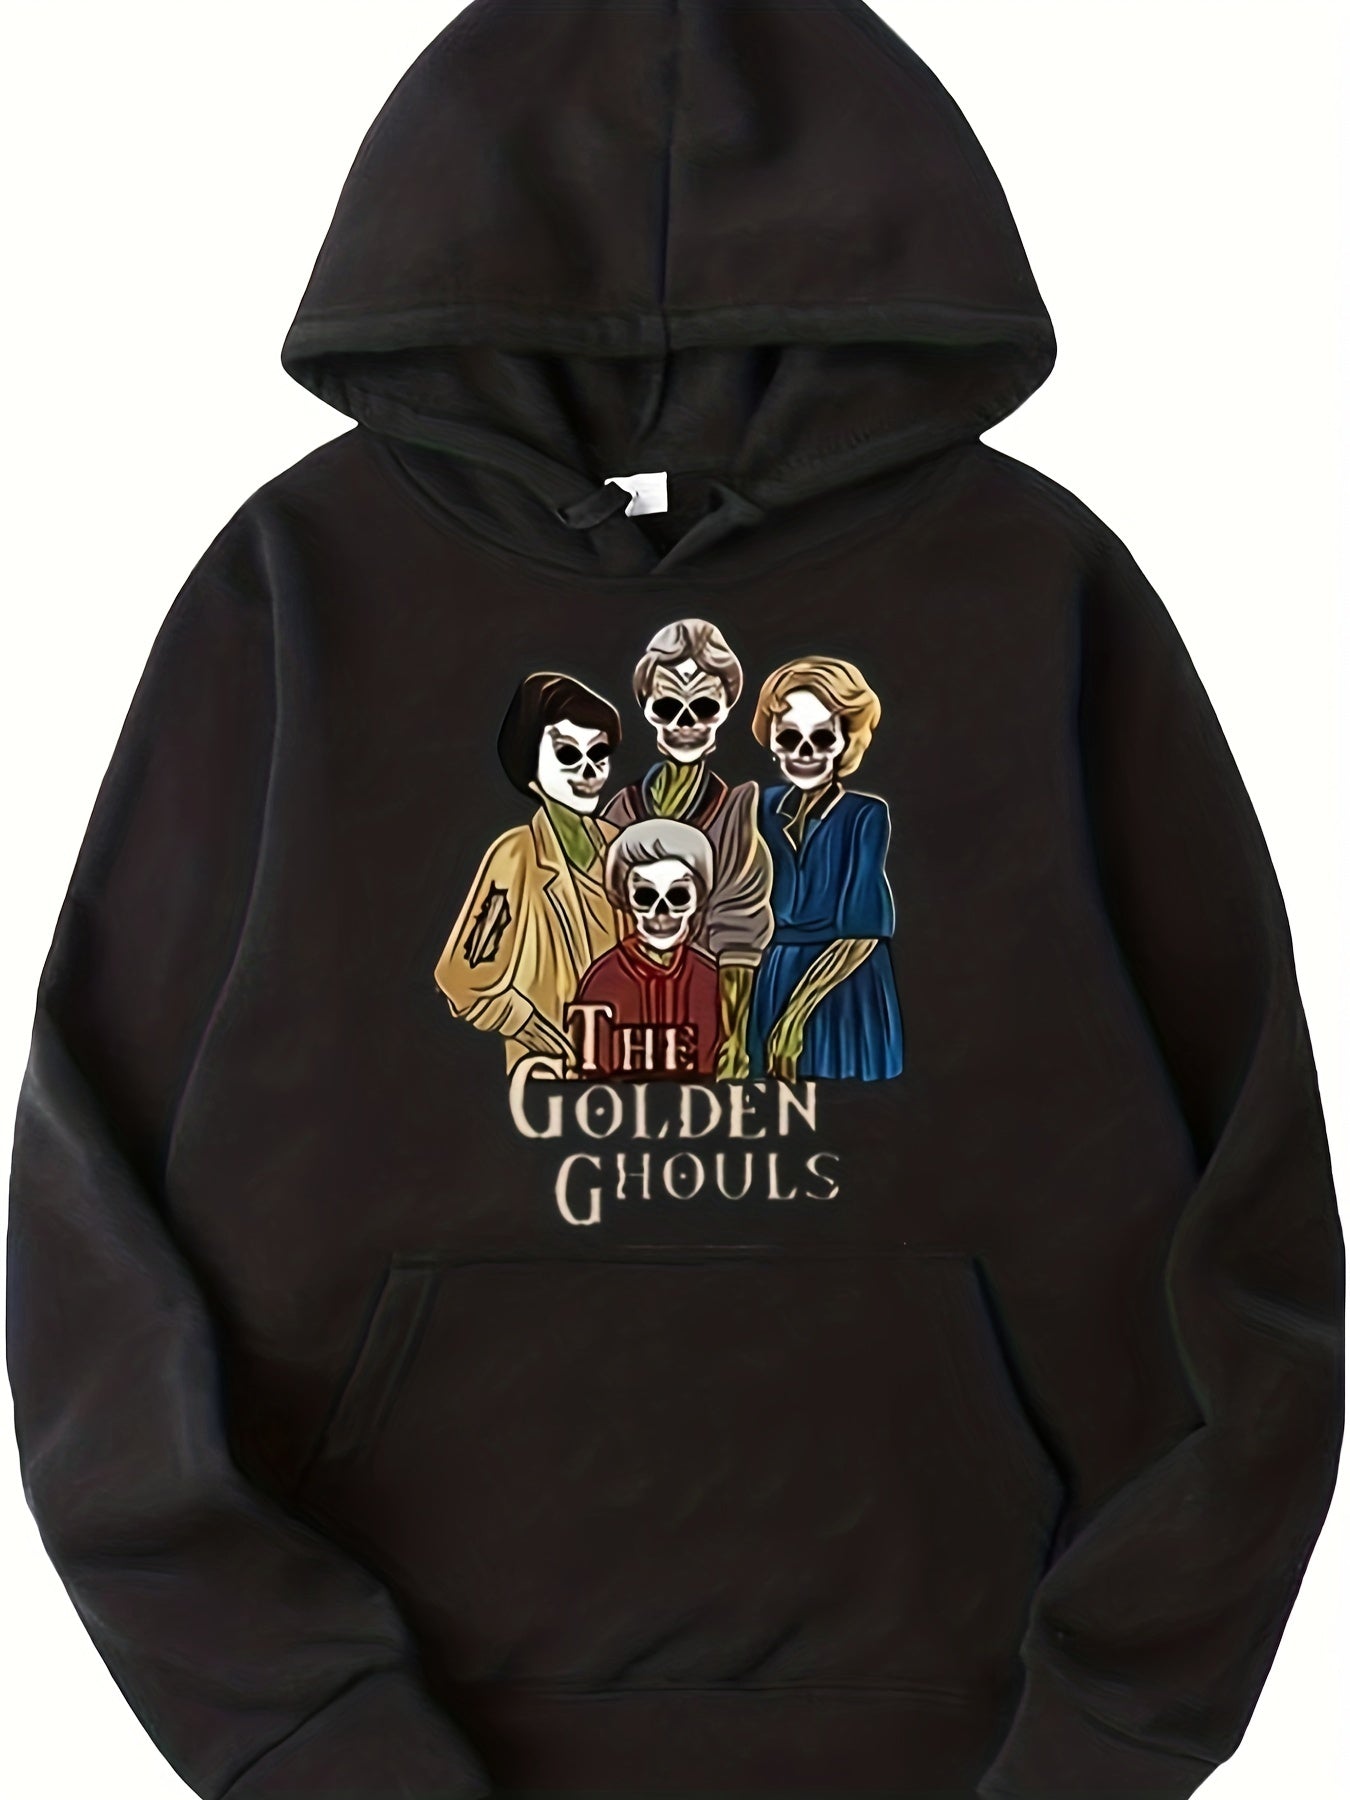 Golden Ghoul Halloween Funny Gift Pullover Sweater Hooded Sweater Warm